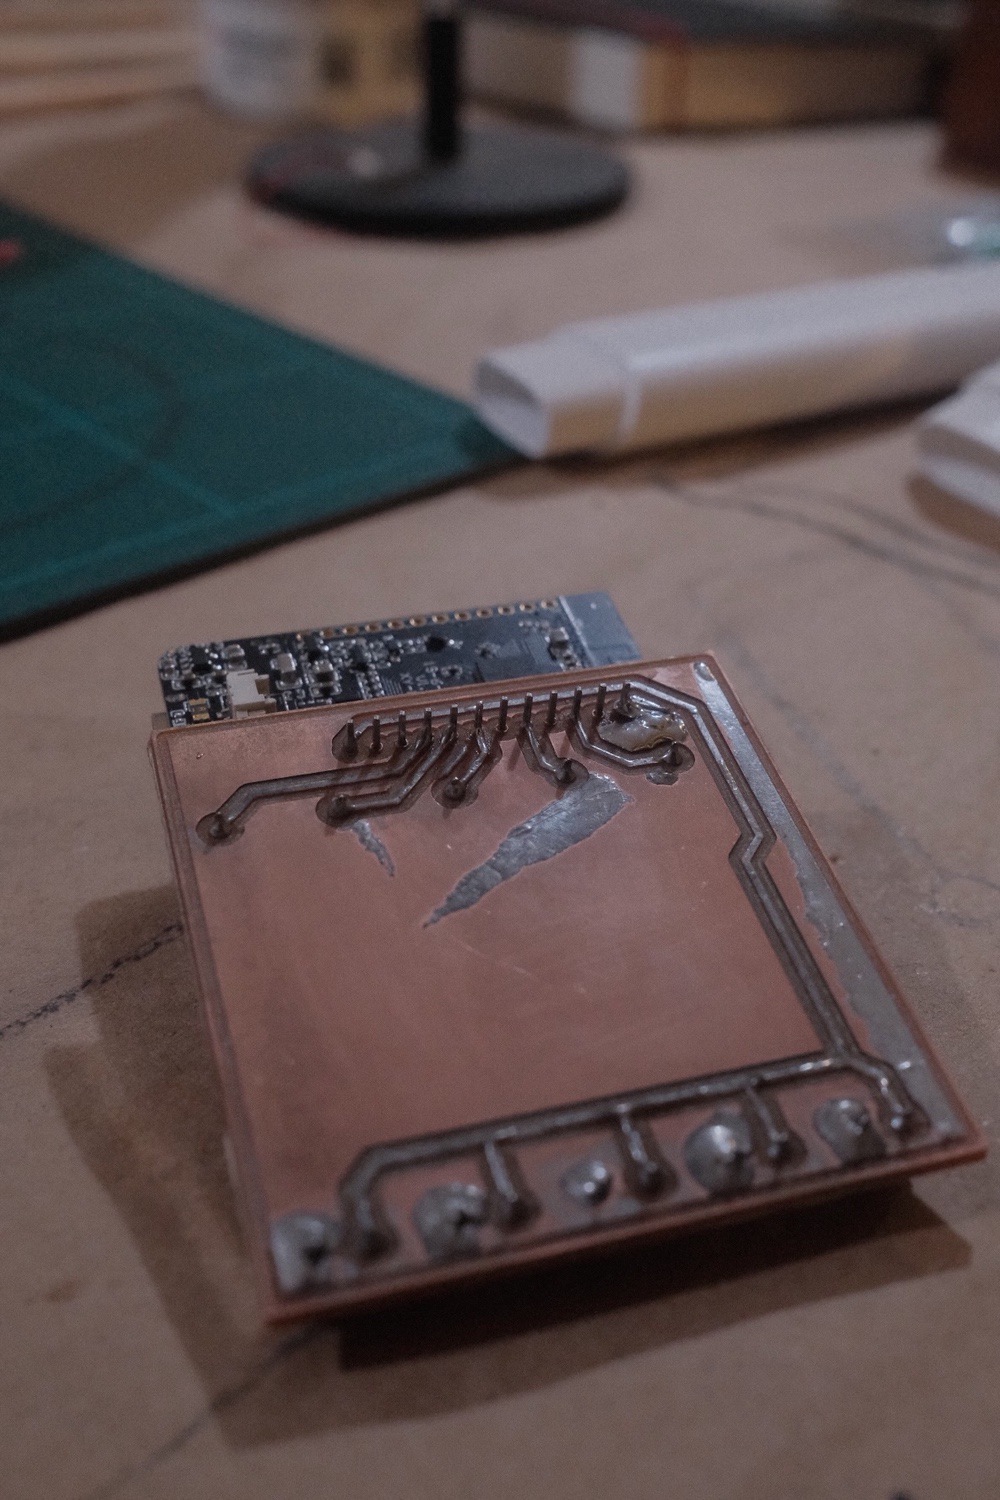 The PCB now soldered." 